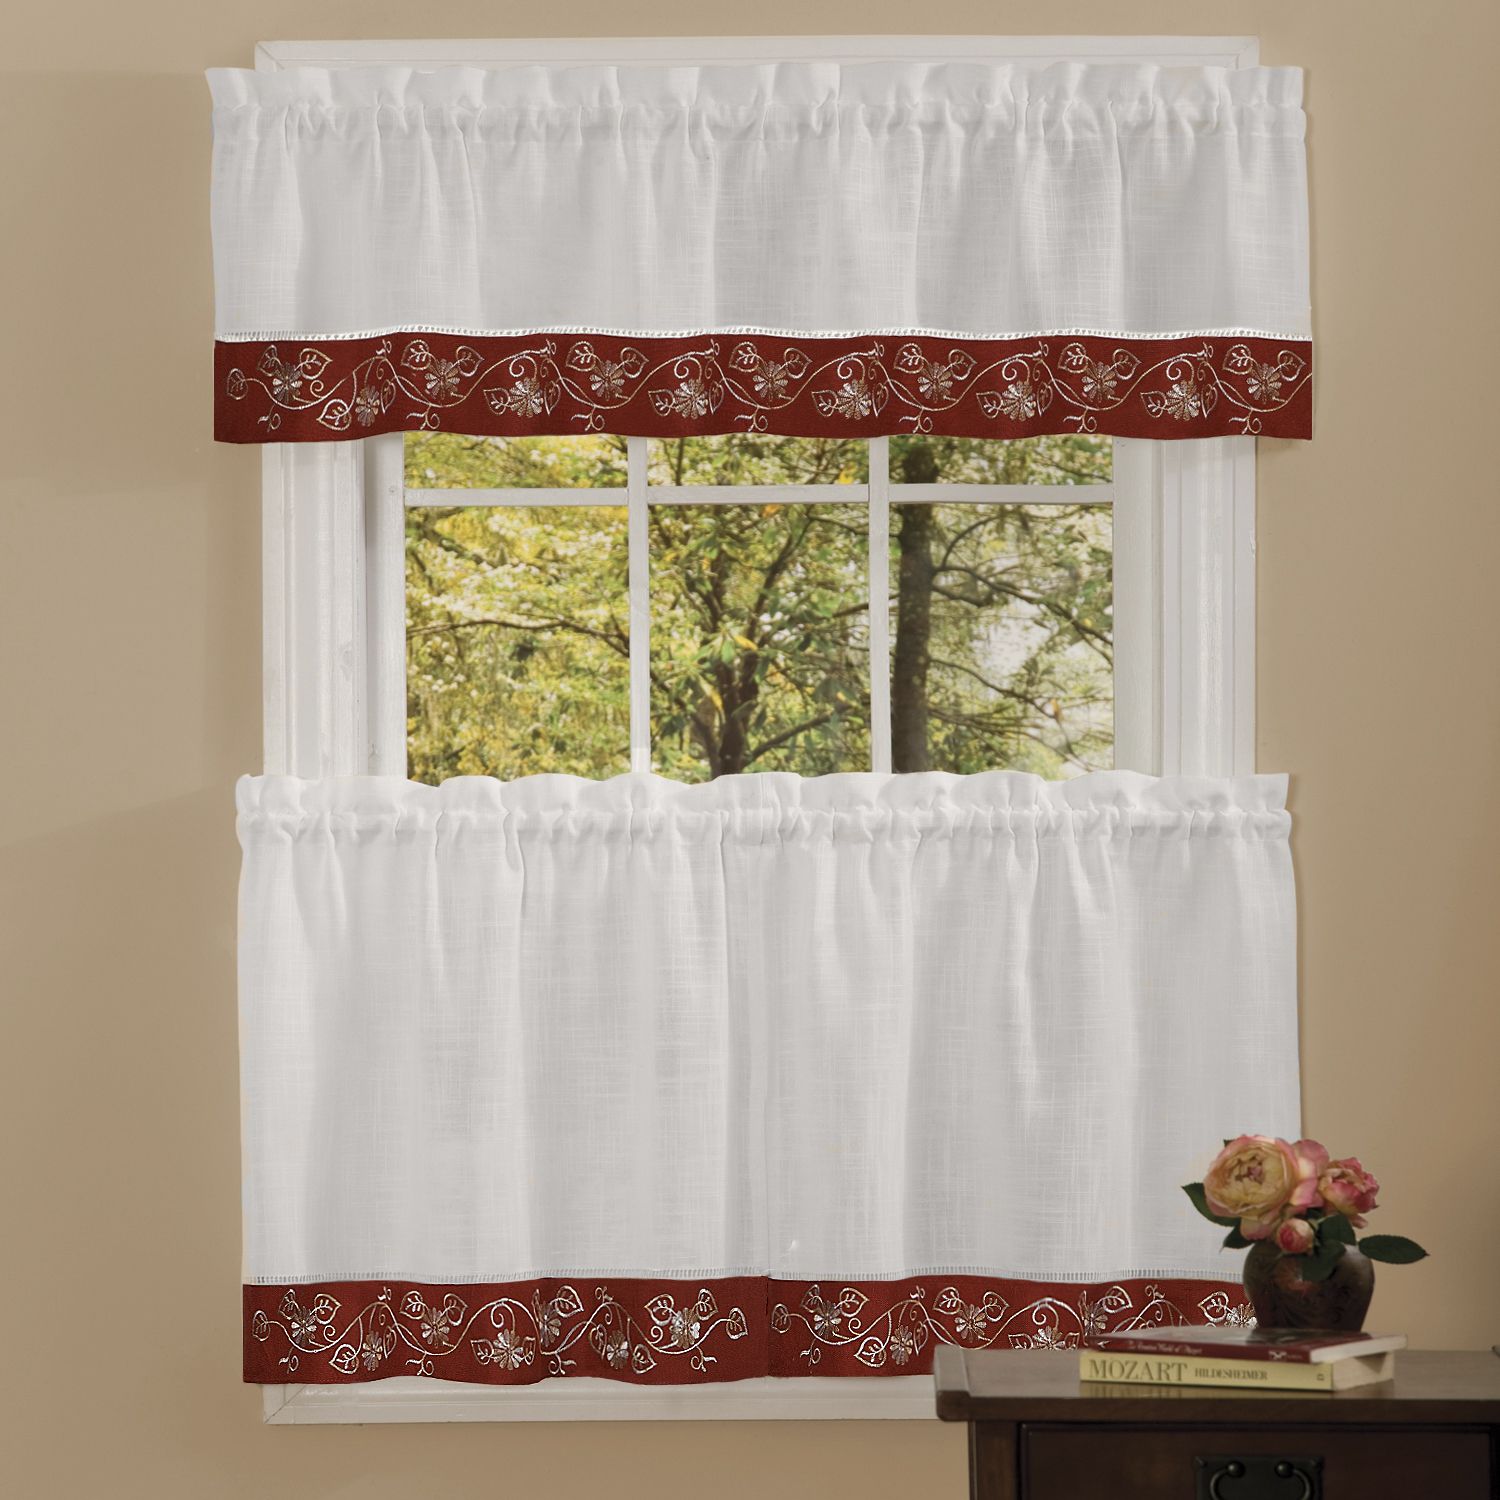 Details About Oakwood Linen Style Kitchen Window Curtains Tiers Or Valance  Burgundy Inside Oakwood Linen Style Decorative Window Curtain Tier Sets (View 3 of 20)